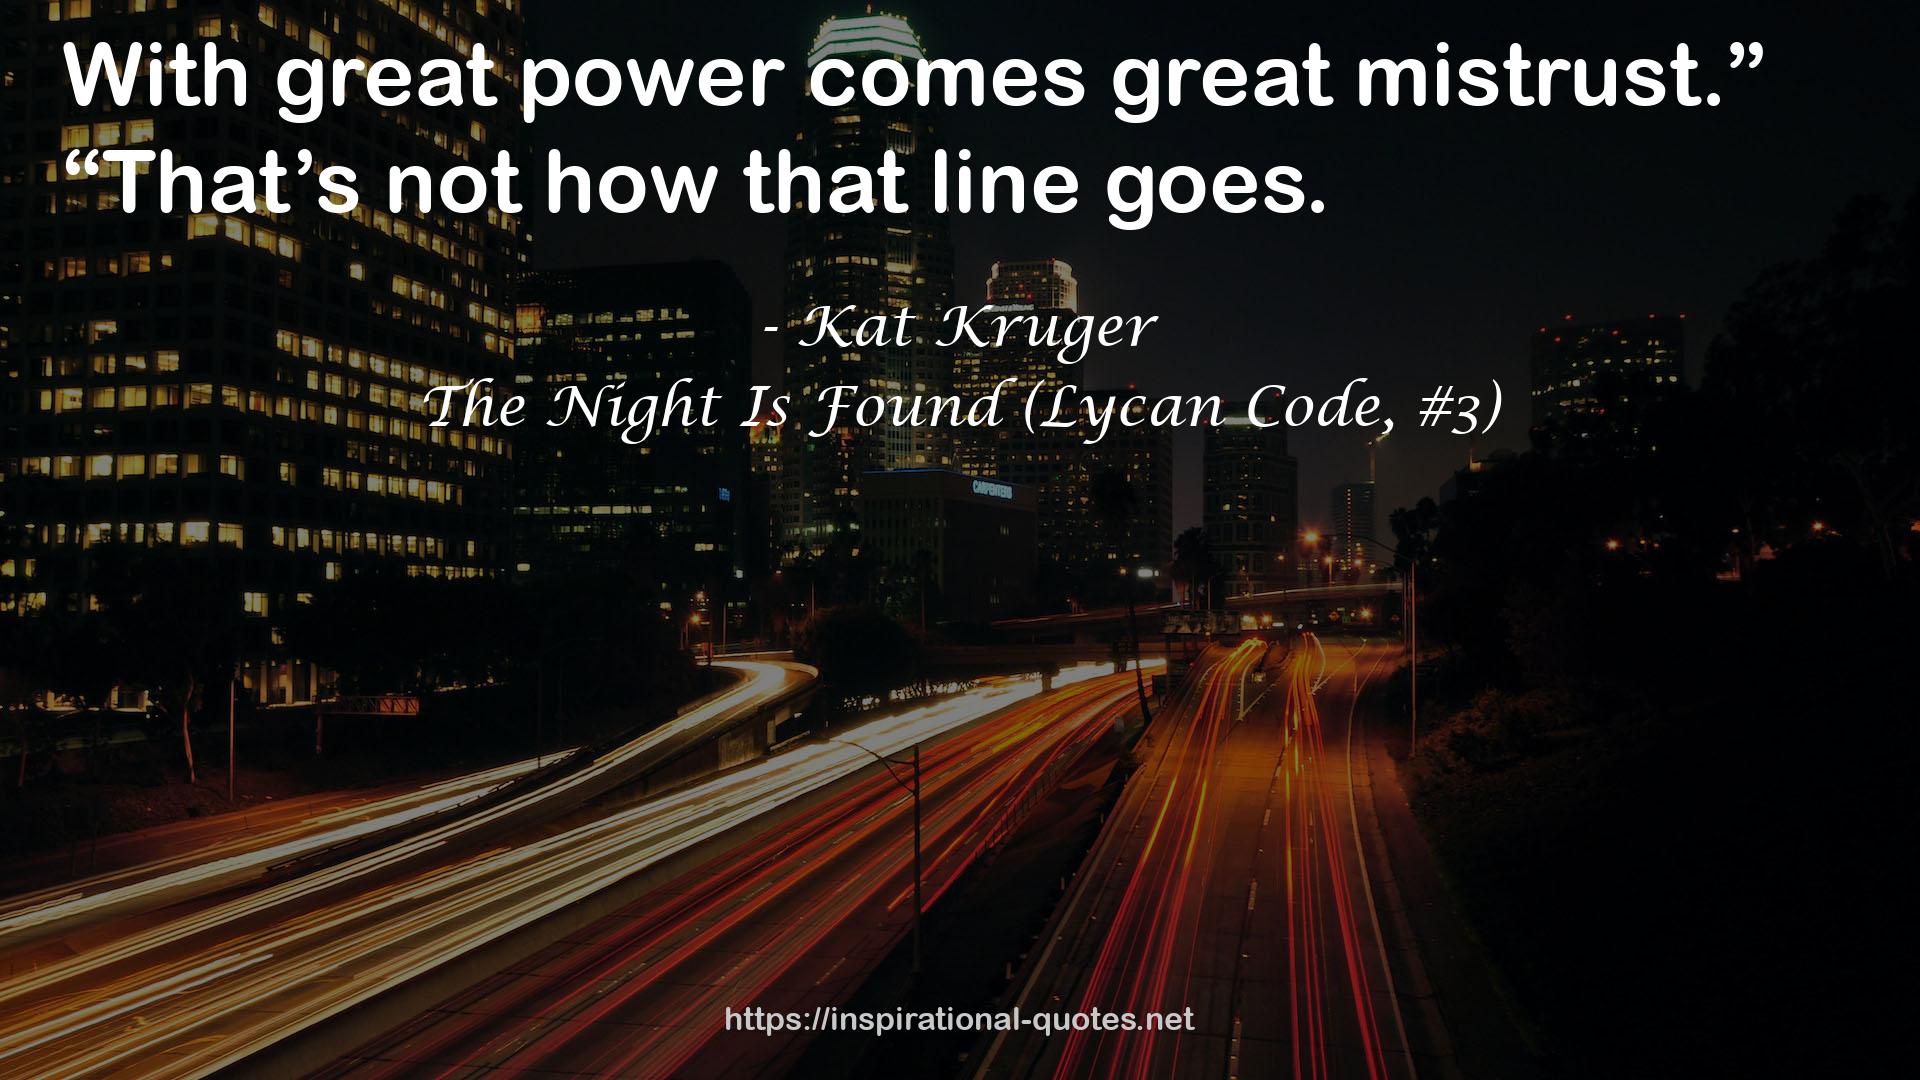 The Night Is Found (Lycan Code, #3) QUOTES